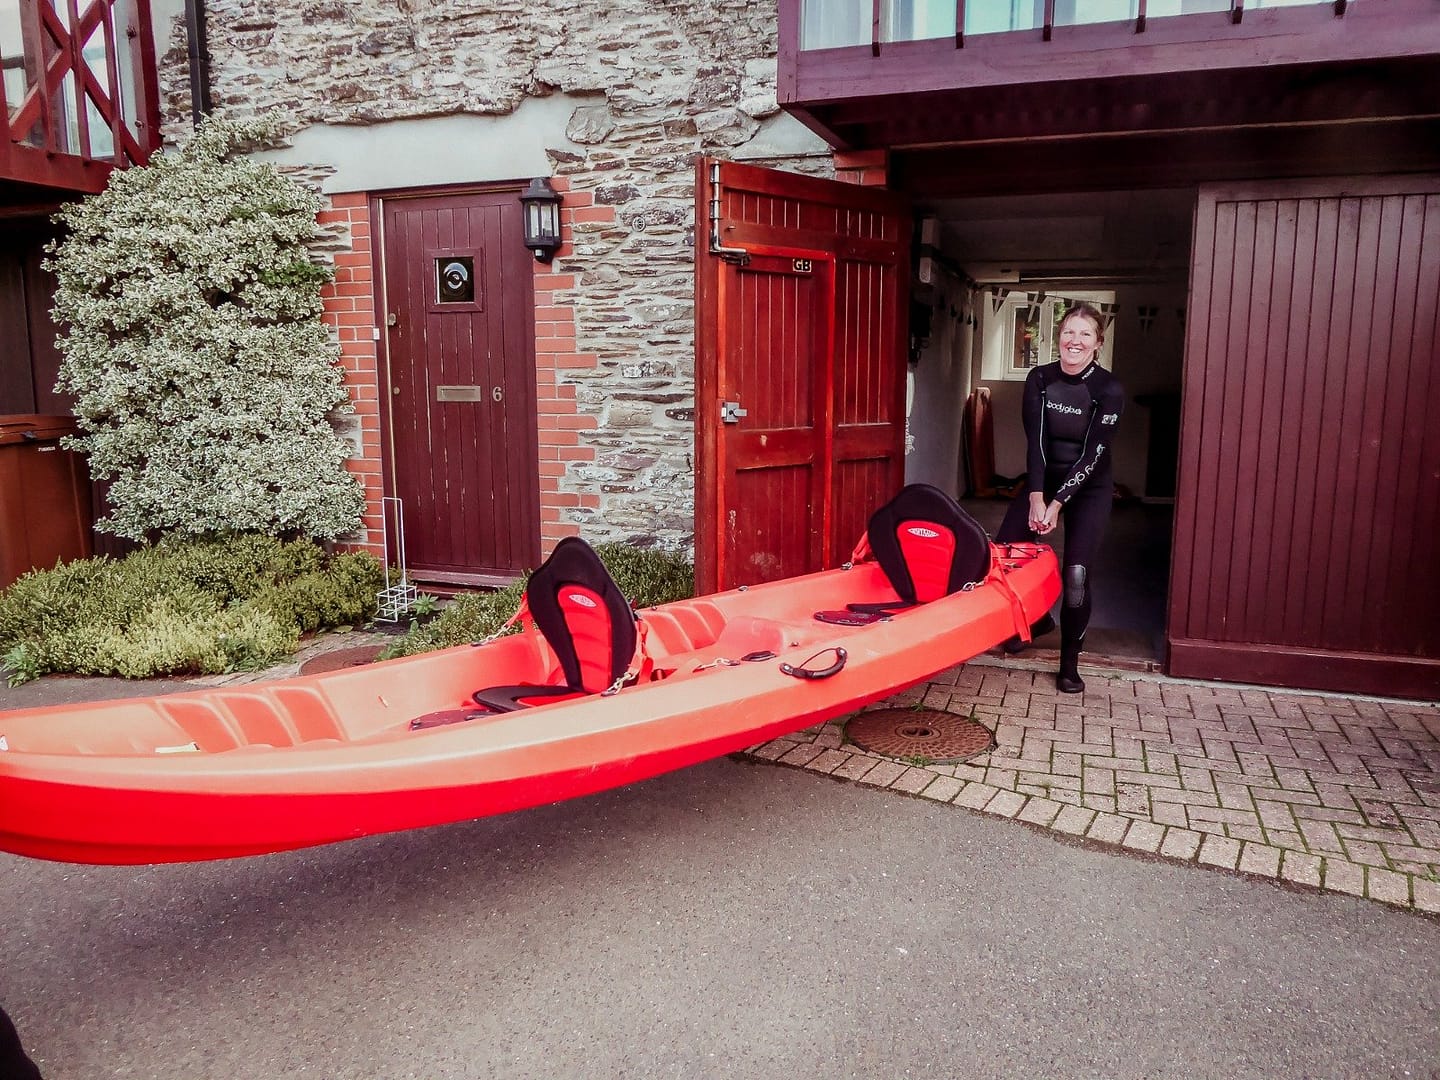 Secure Storage for Kayaks - Anchor cottage - Holiday Cottages Noss Mayo